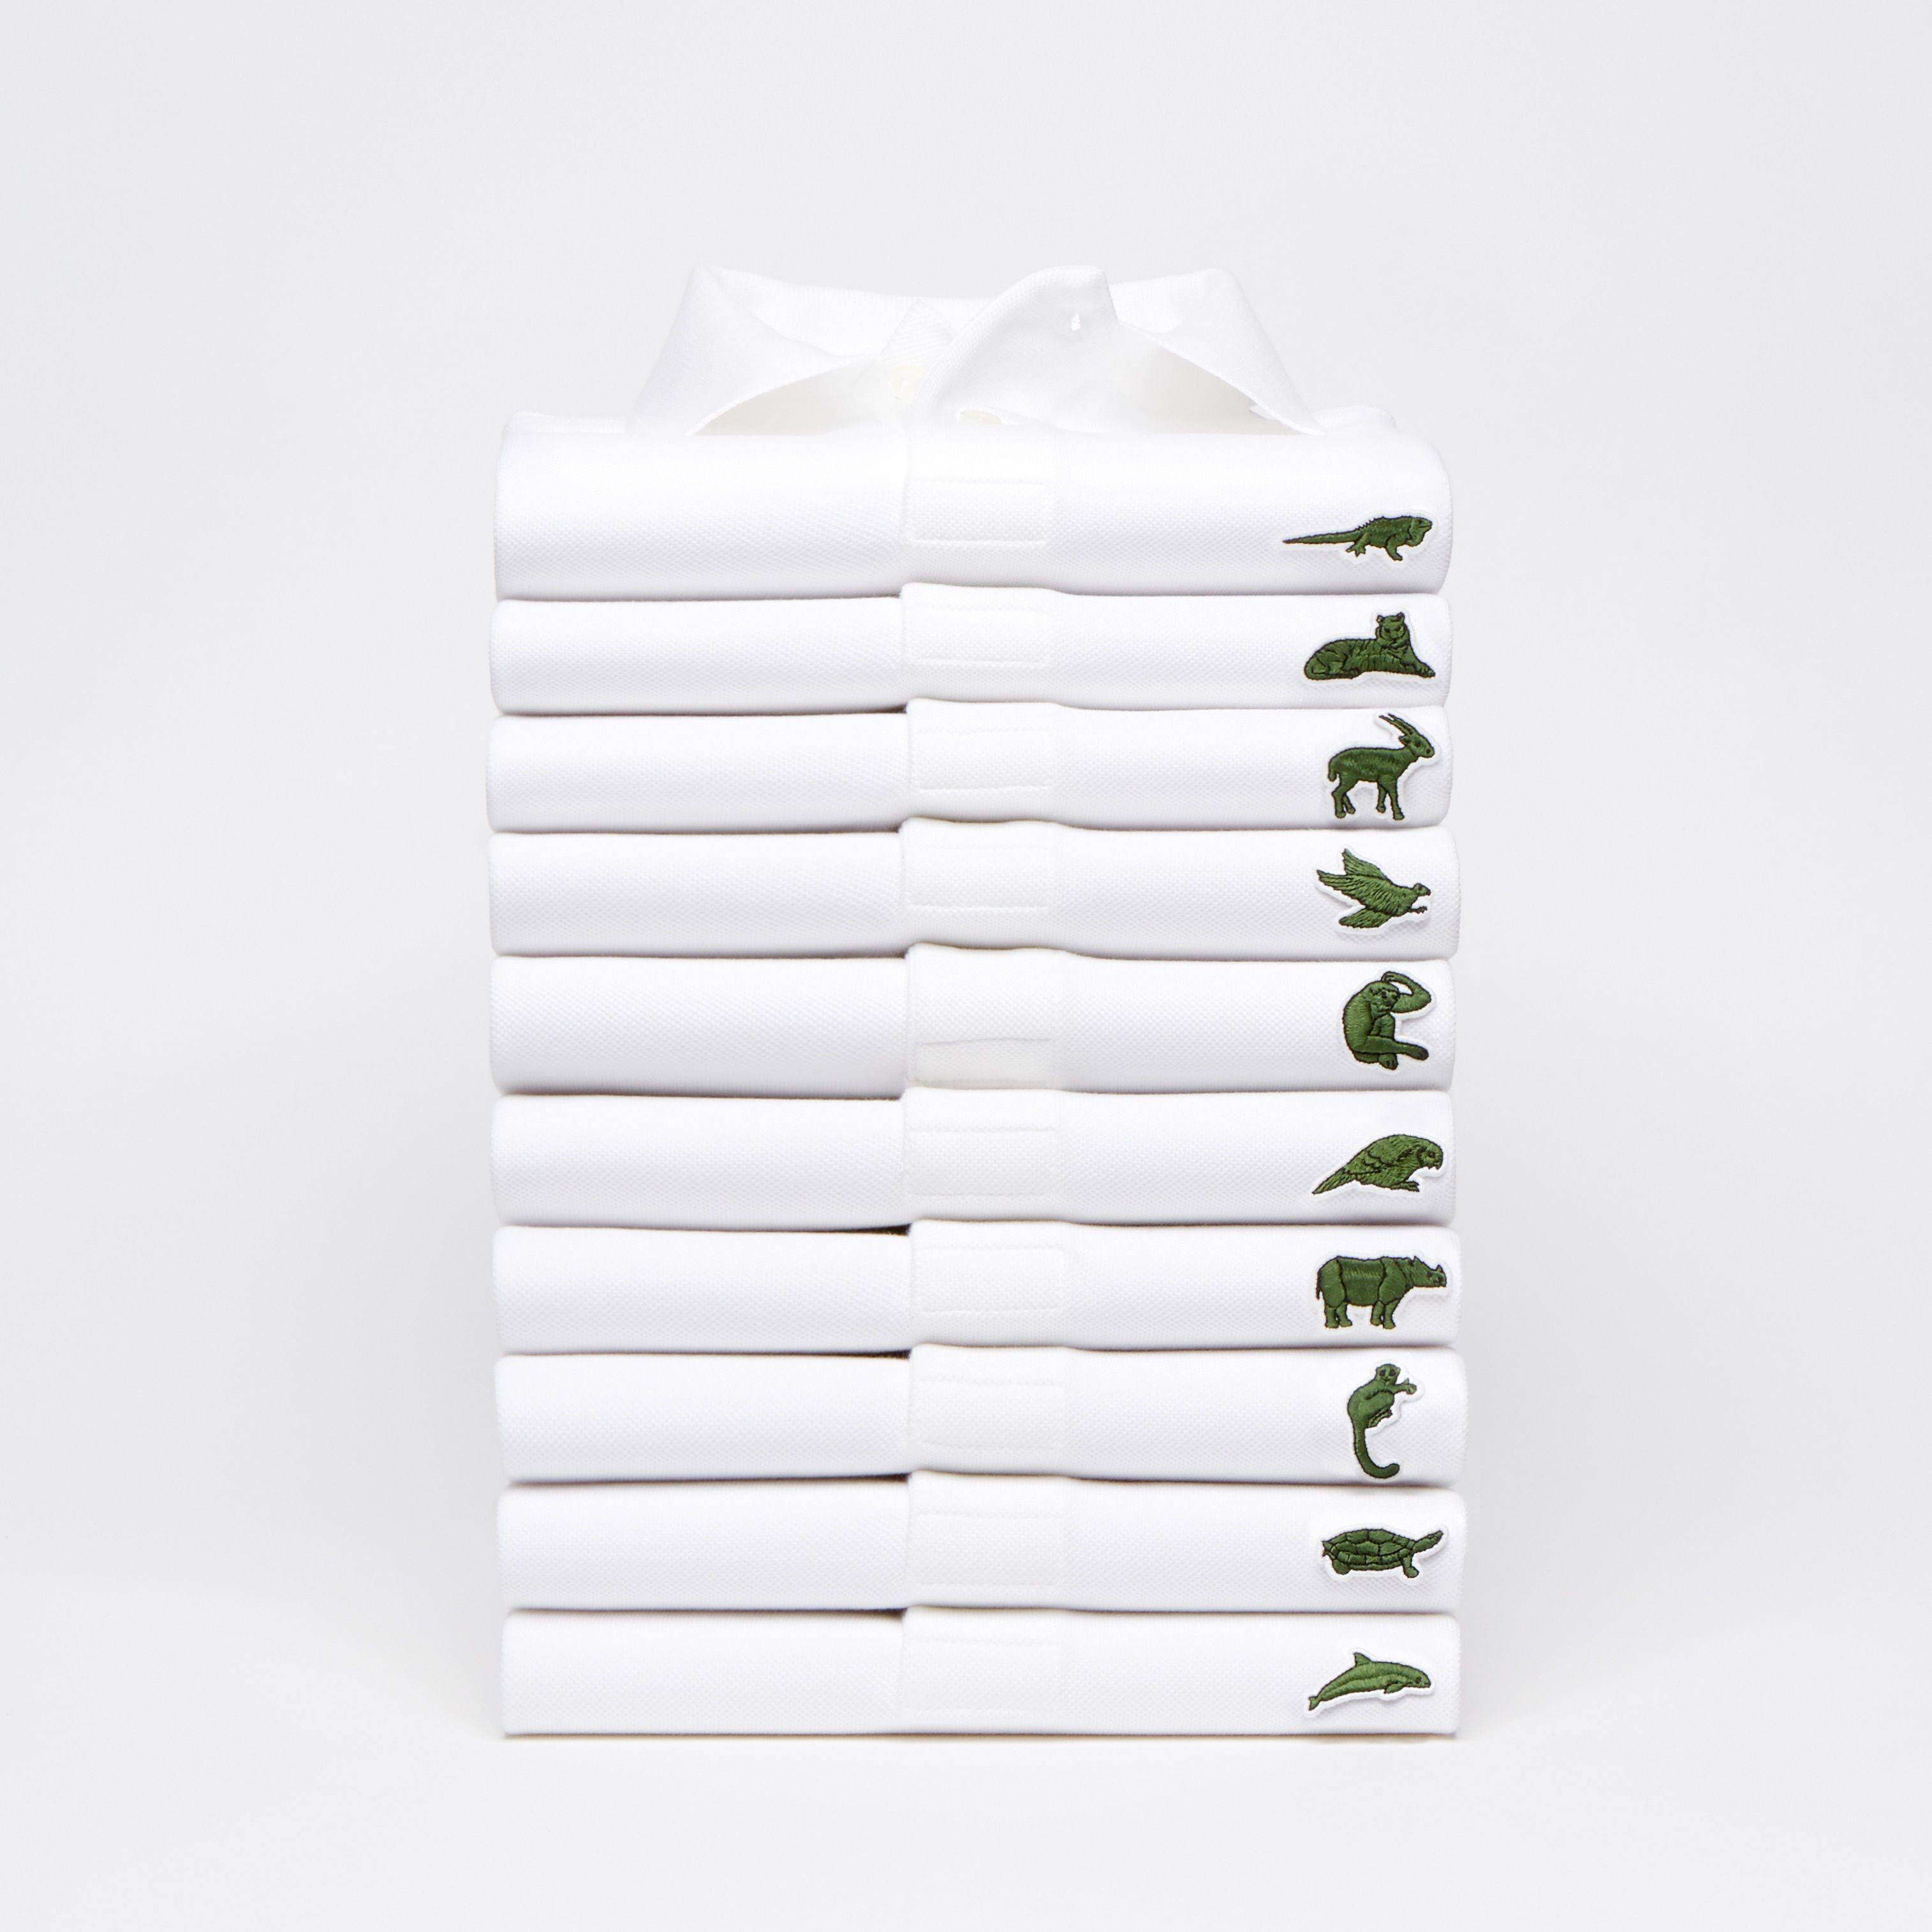 history of lacoste brand